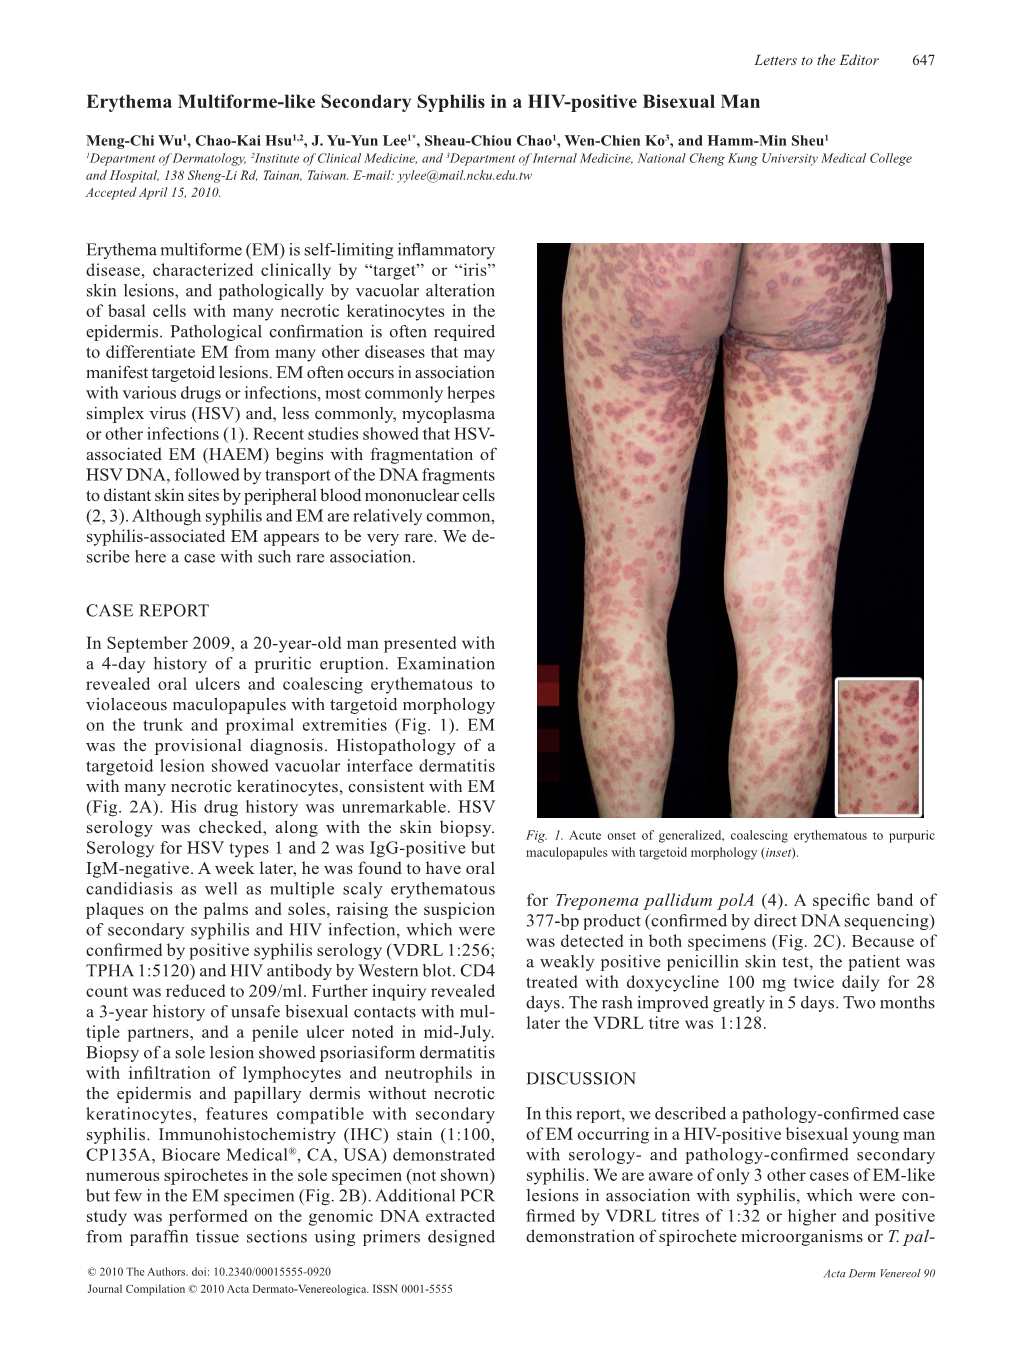 Erythema Multiforme-Like Secondary Syphilis in a HIV-Positive Bisexual Man